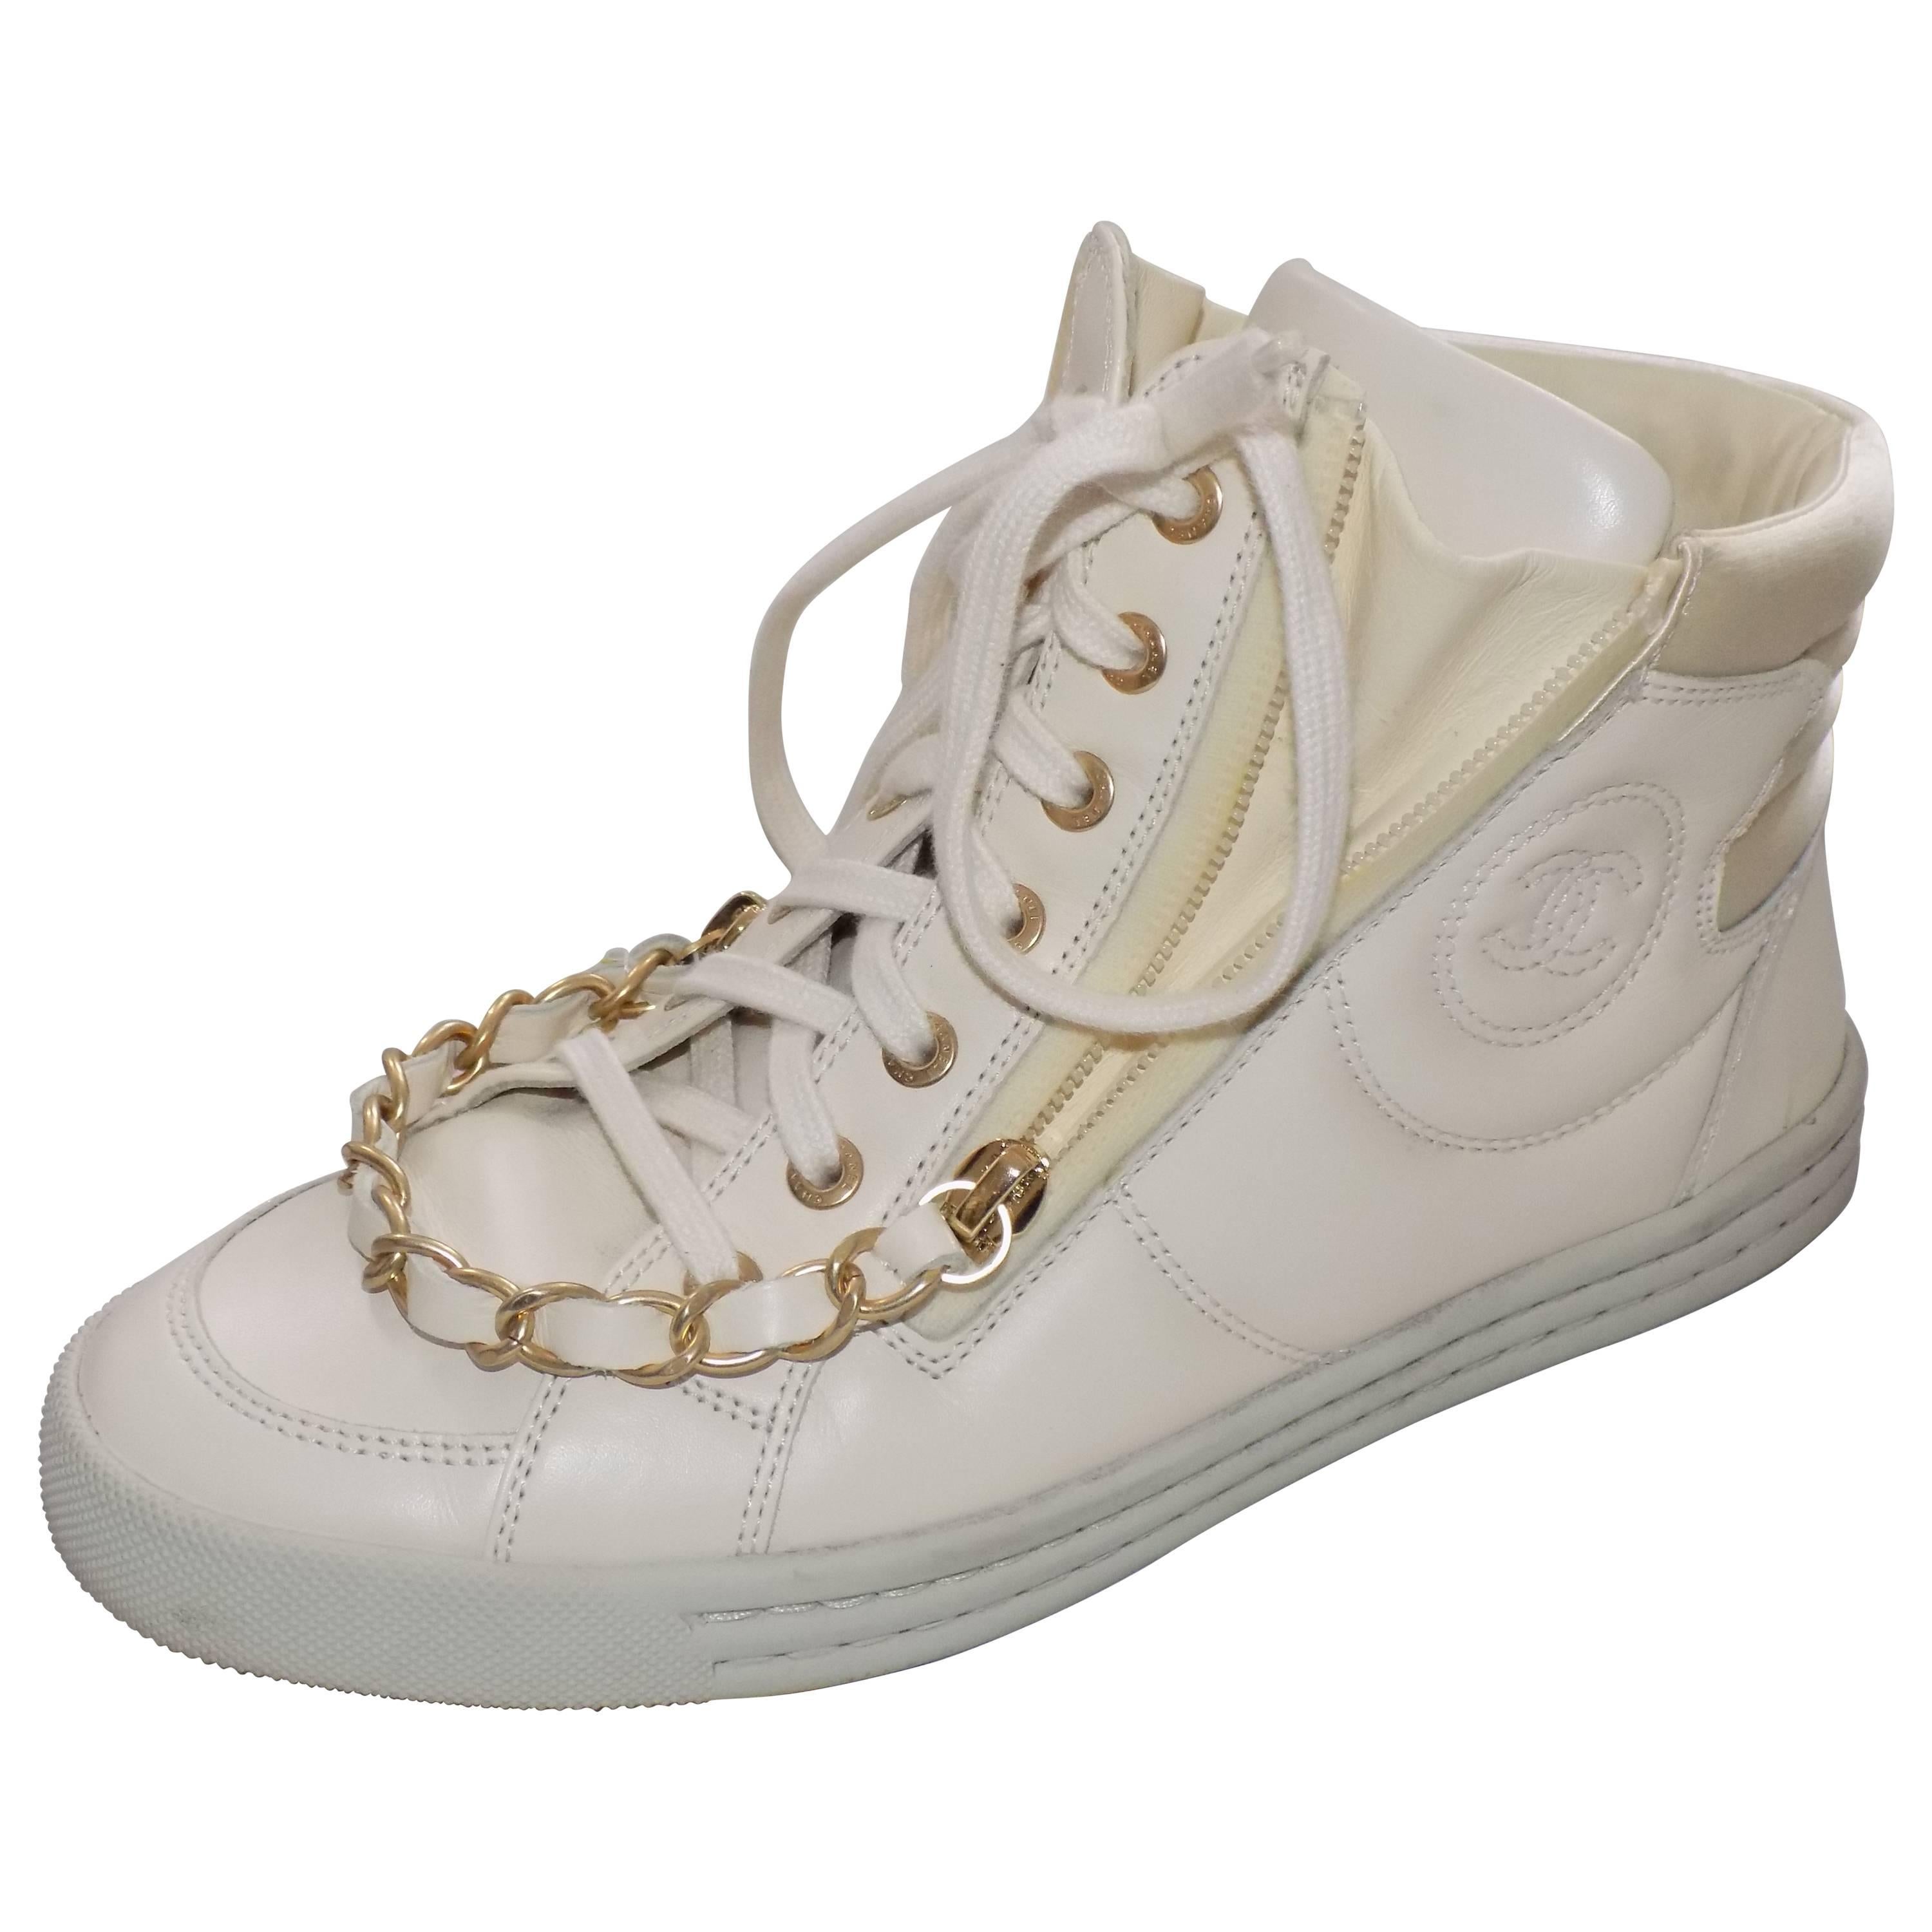  Chanel 37.5   High Top Sneakers shoes  with  Chain winter white